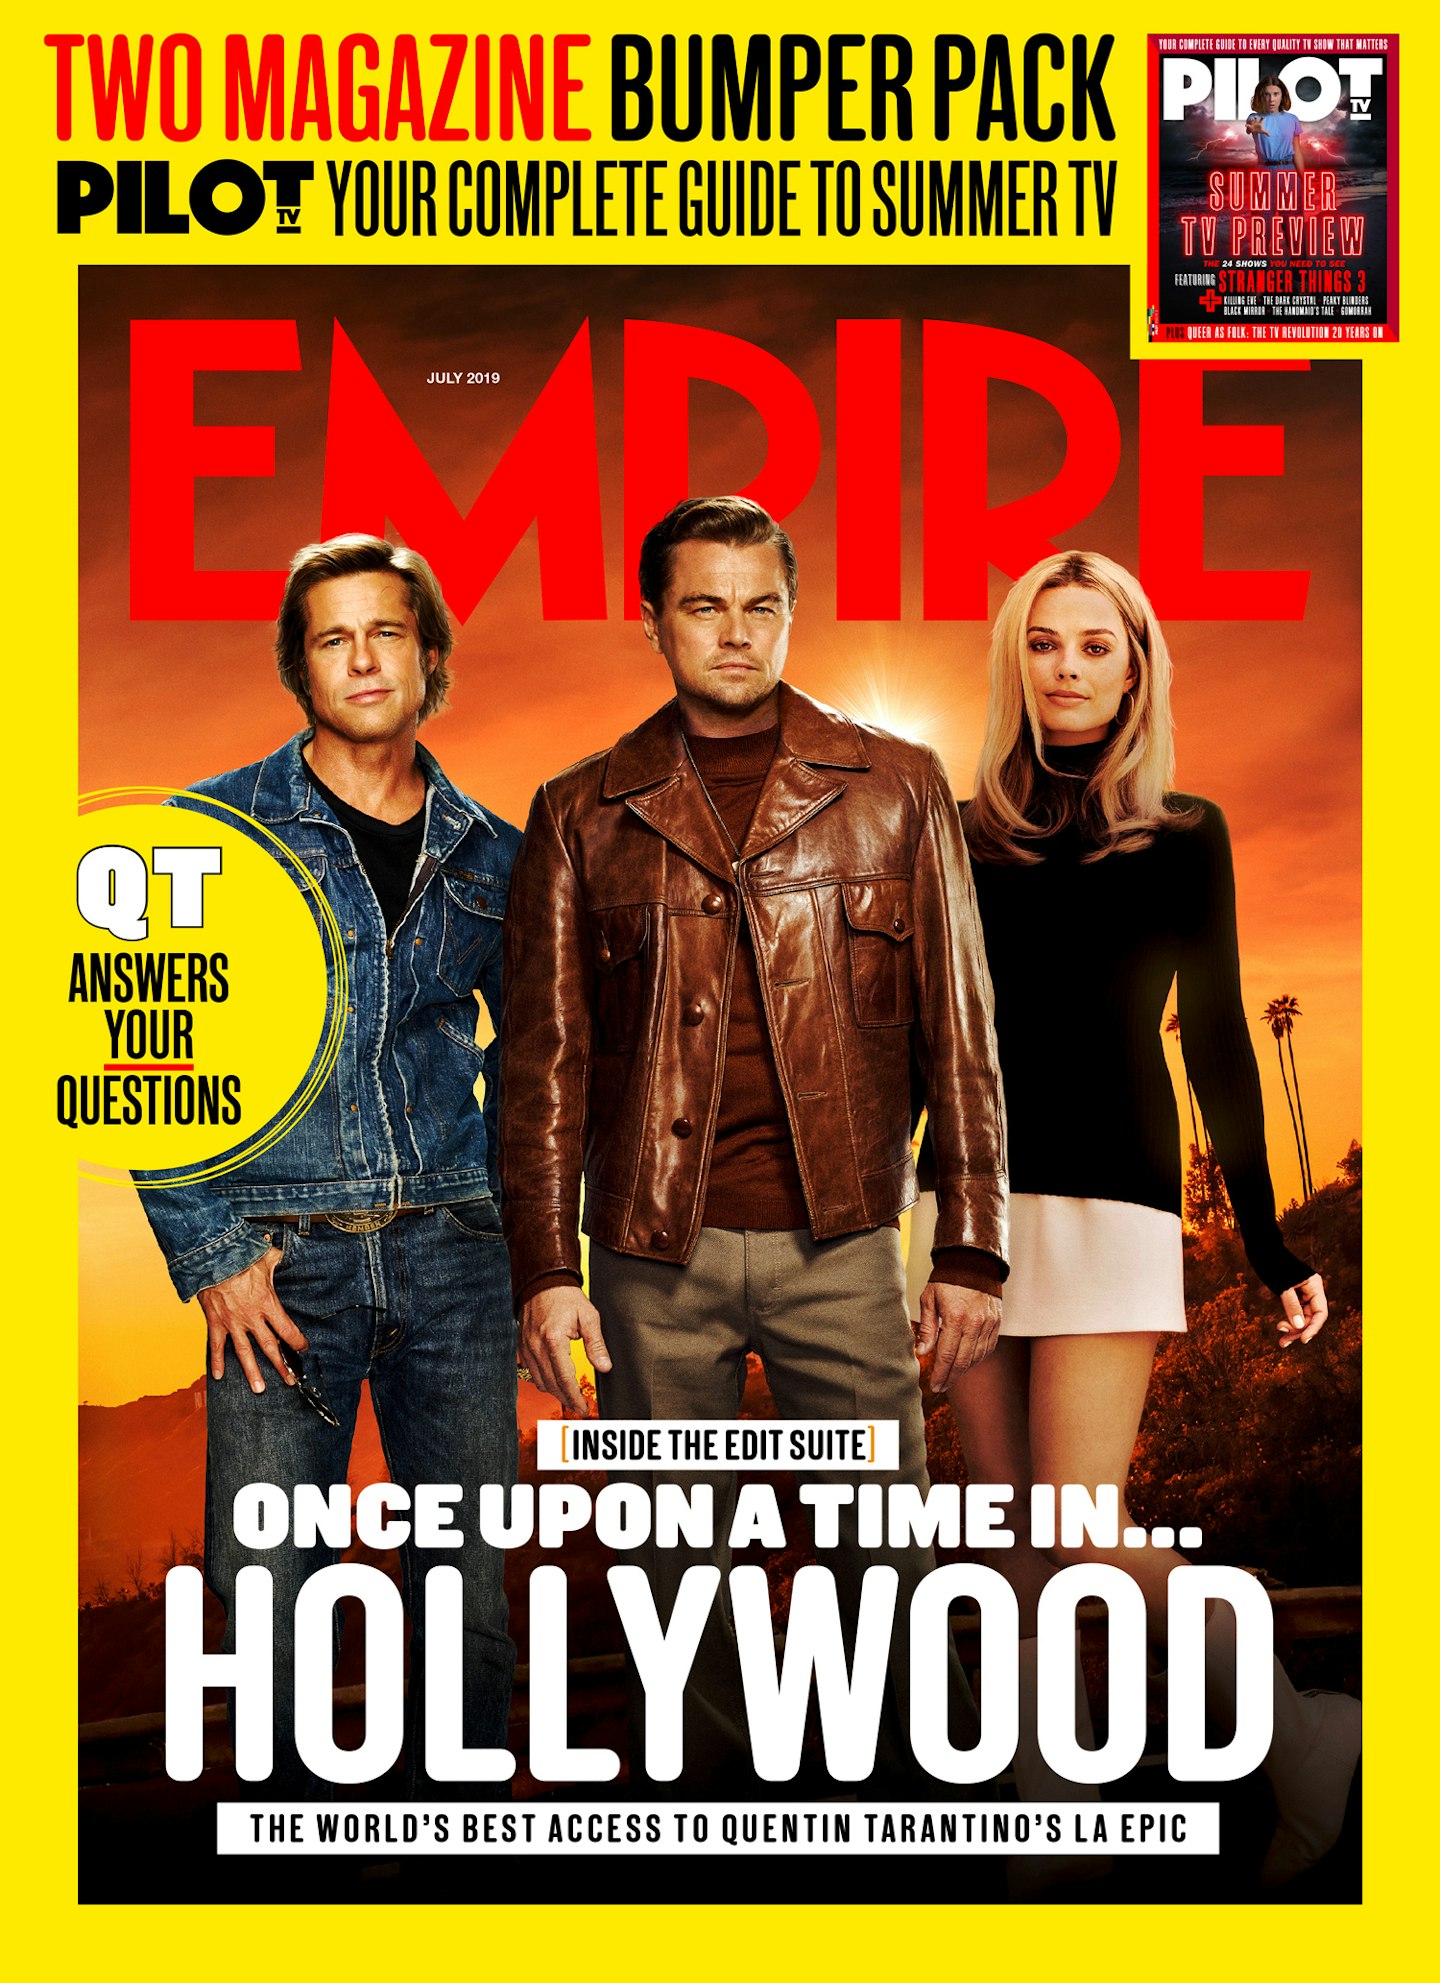 Empire – July 2019 newsstand cover - once upon a time in hollywood